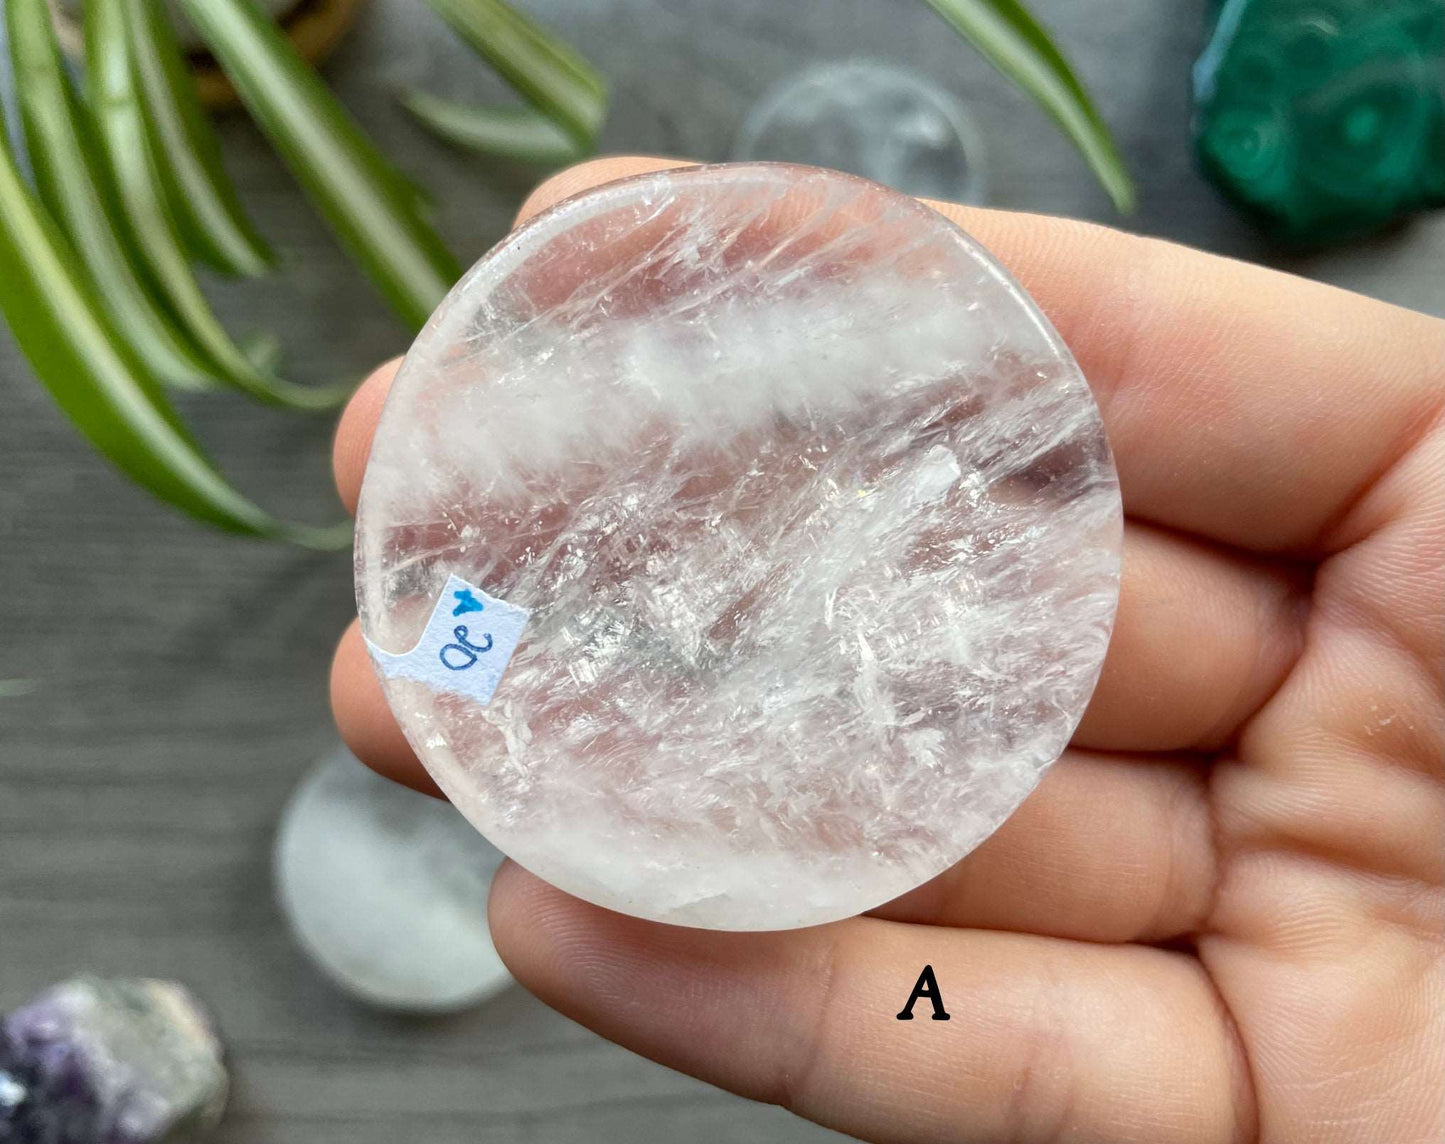 Pictured is a clear quartz crystal coin.